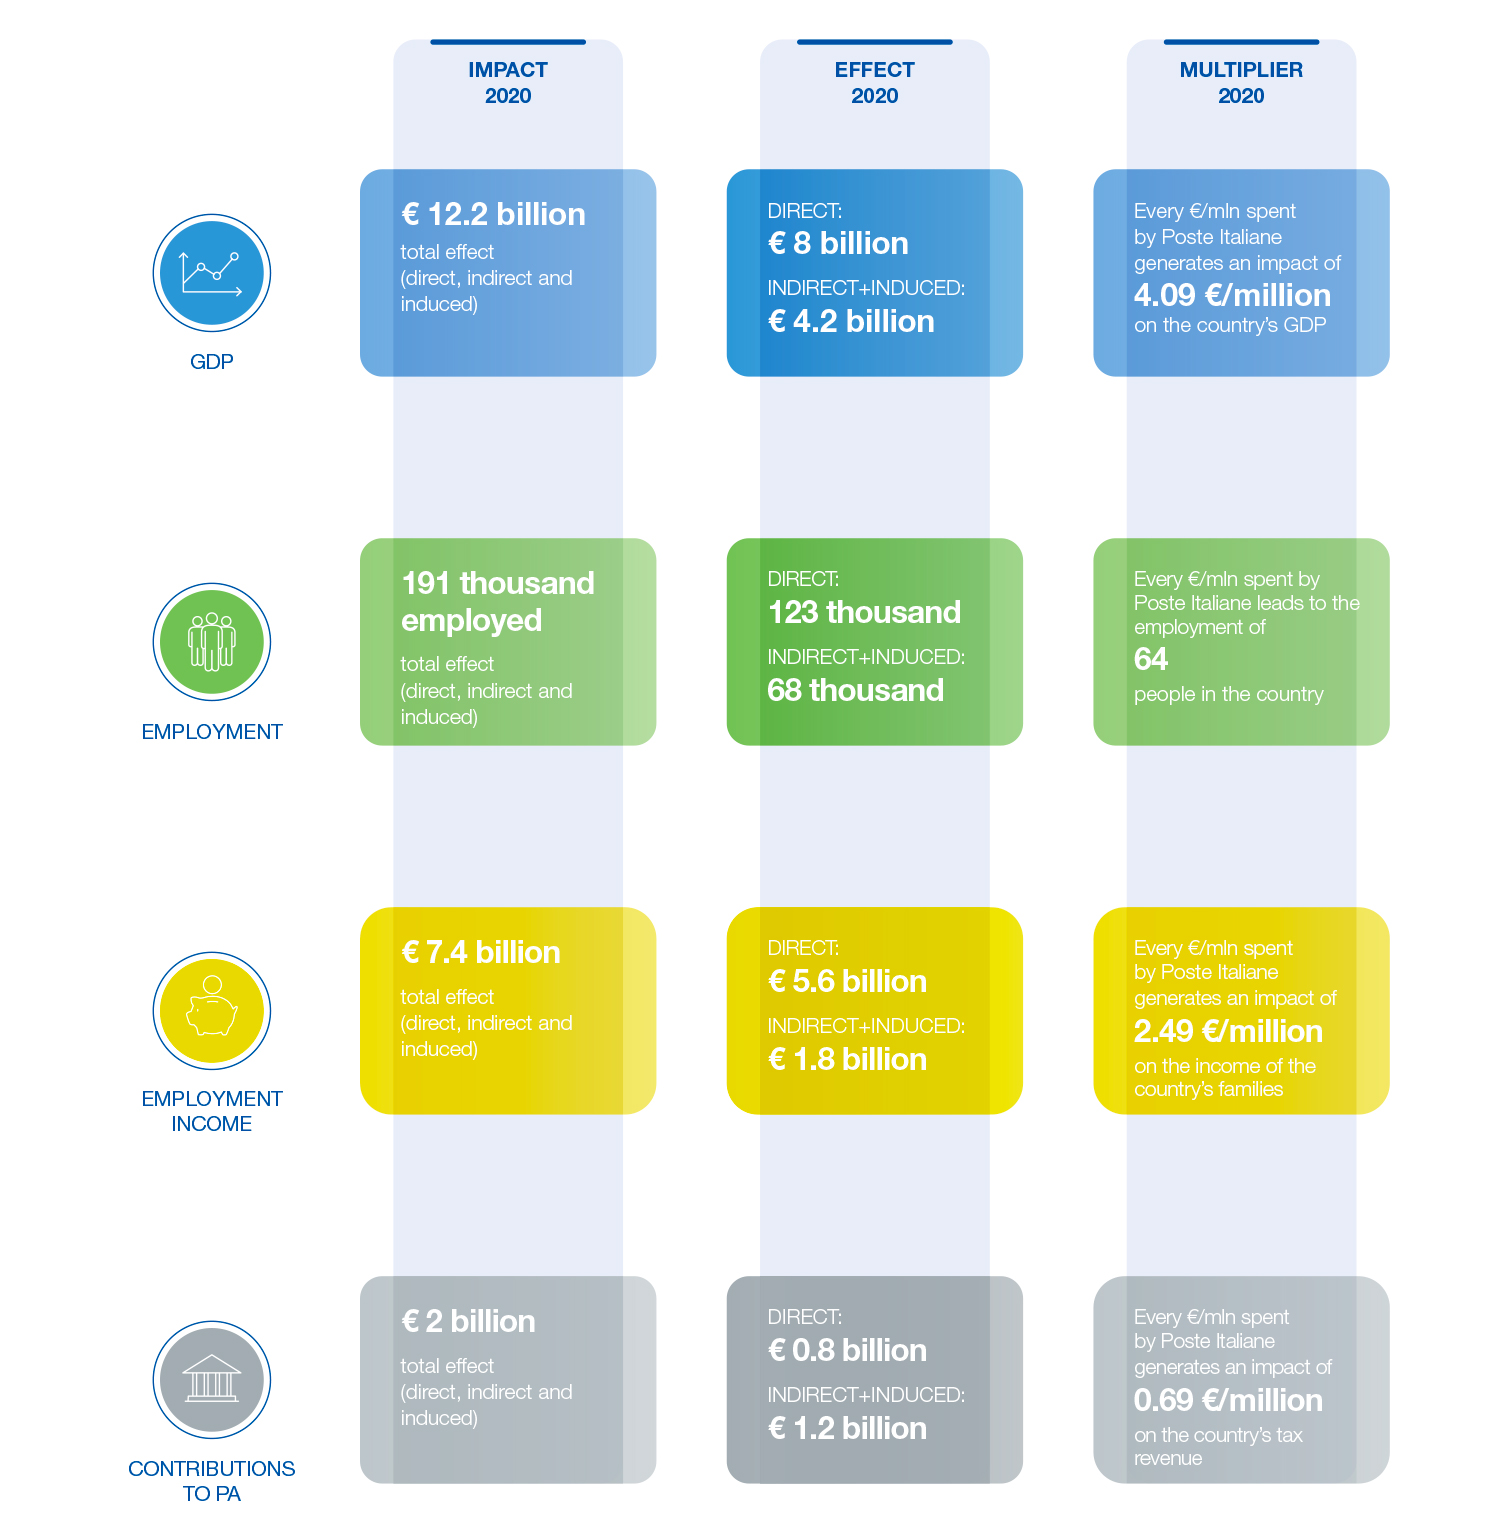 The impacts generated by Poste Italiane